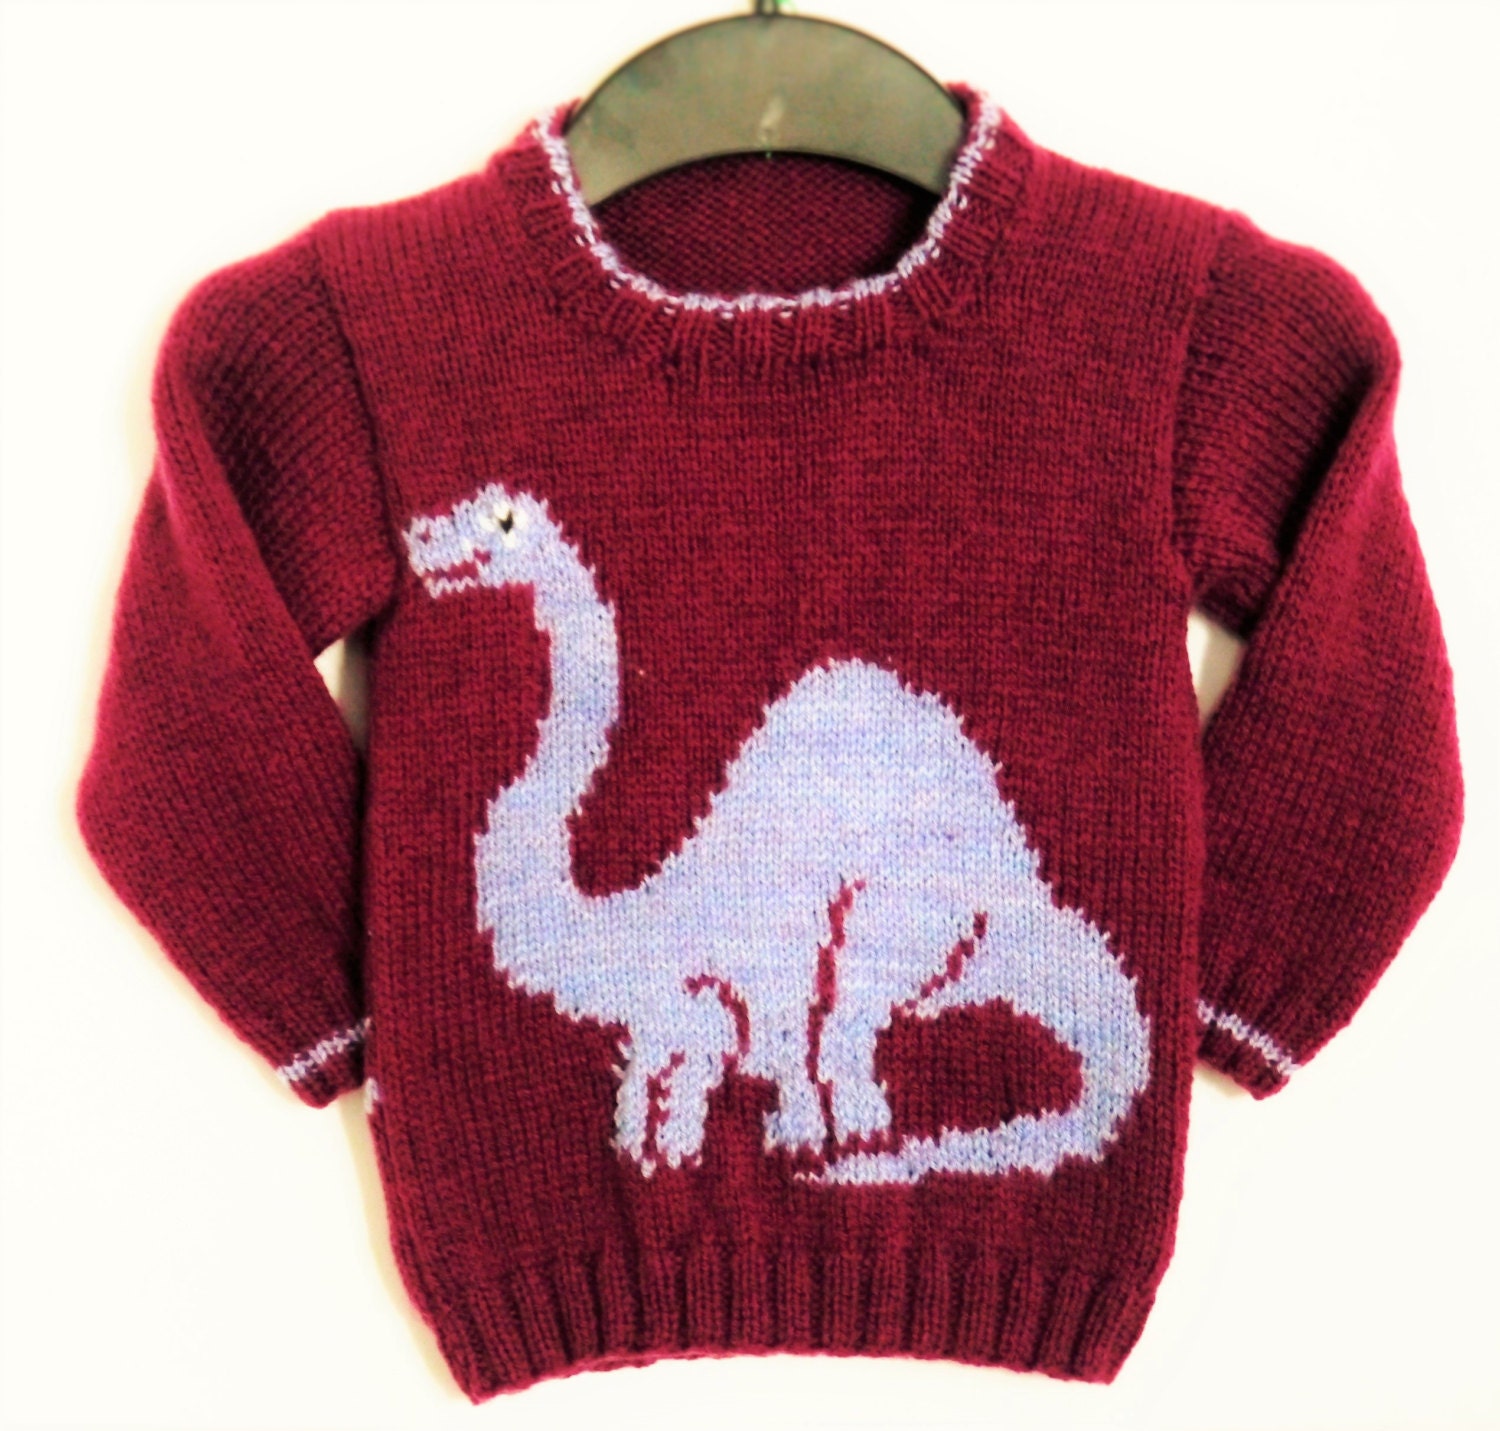 Knitting Pattern for Sweater with Dinosaur Jumper Knitting